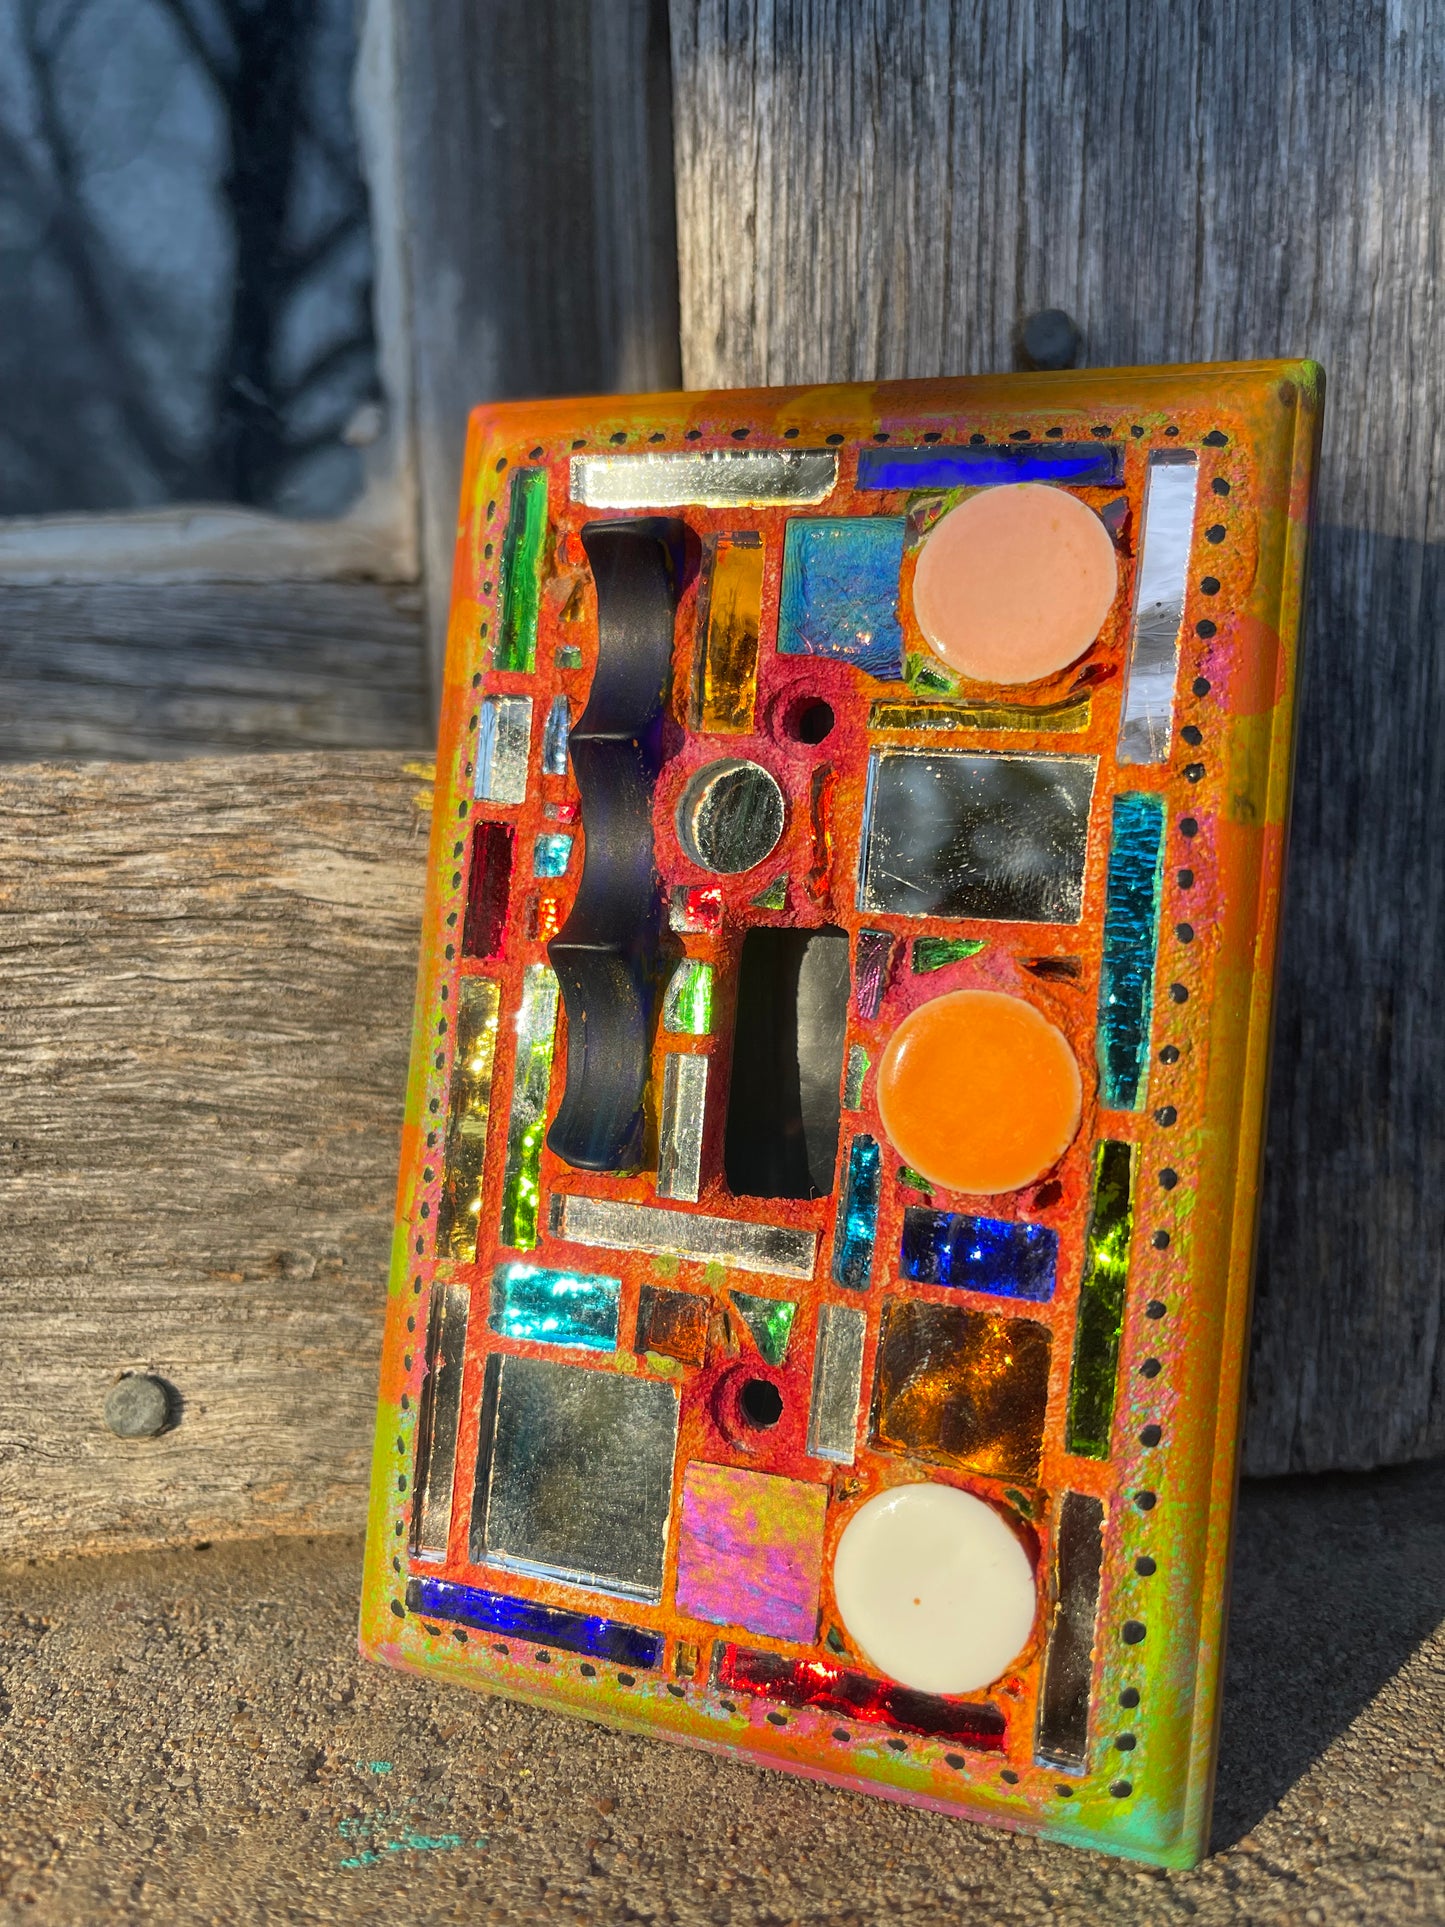 Sparkly single toggle light switch cover as mini mosaic wall art